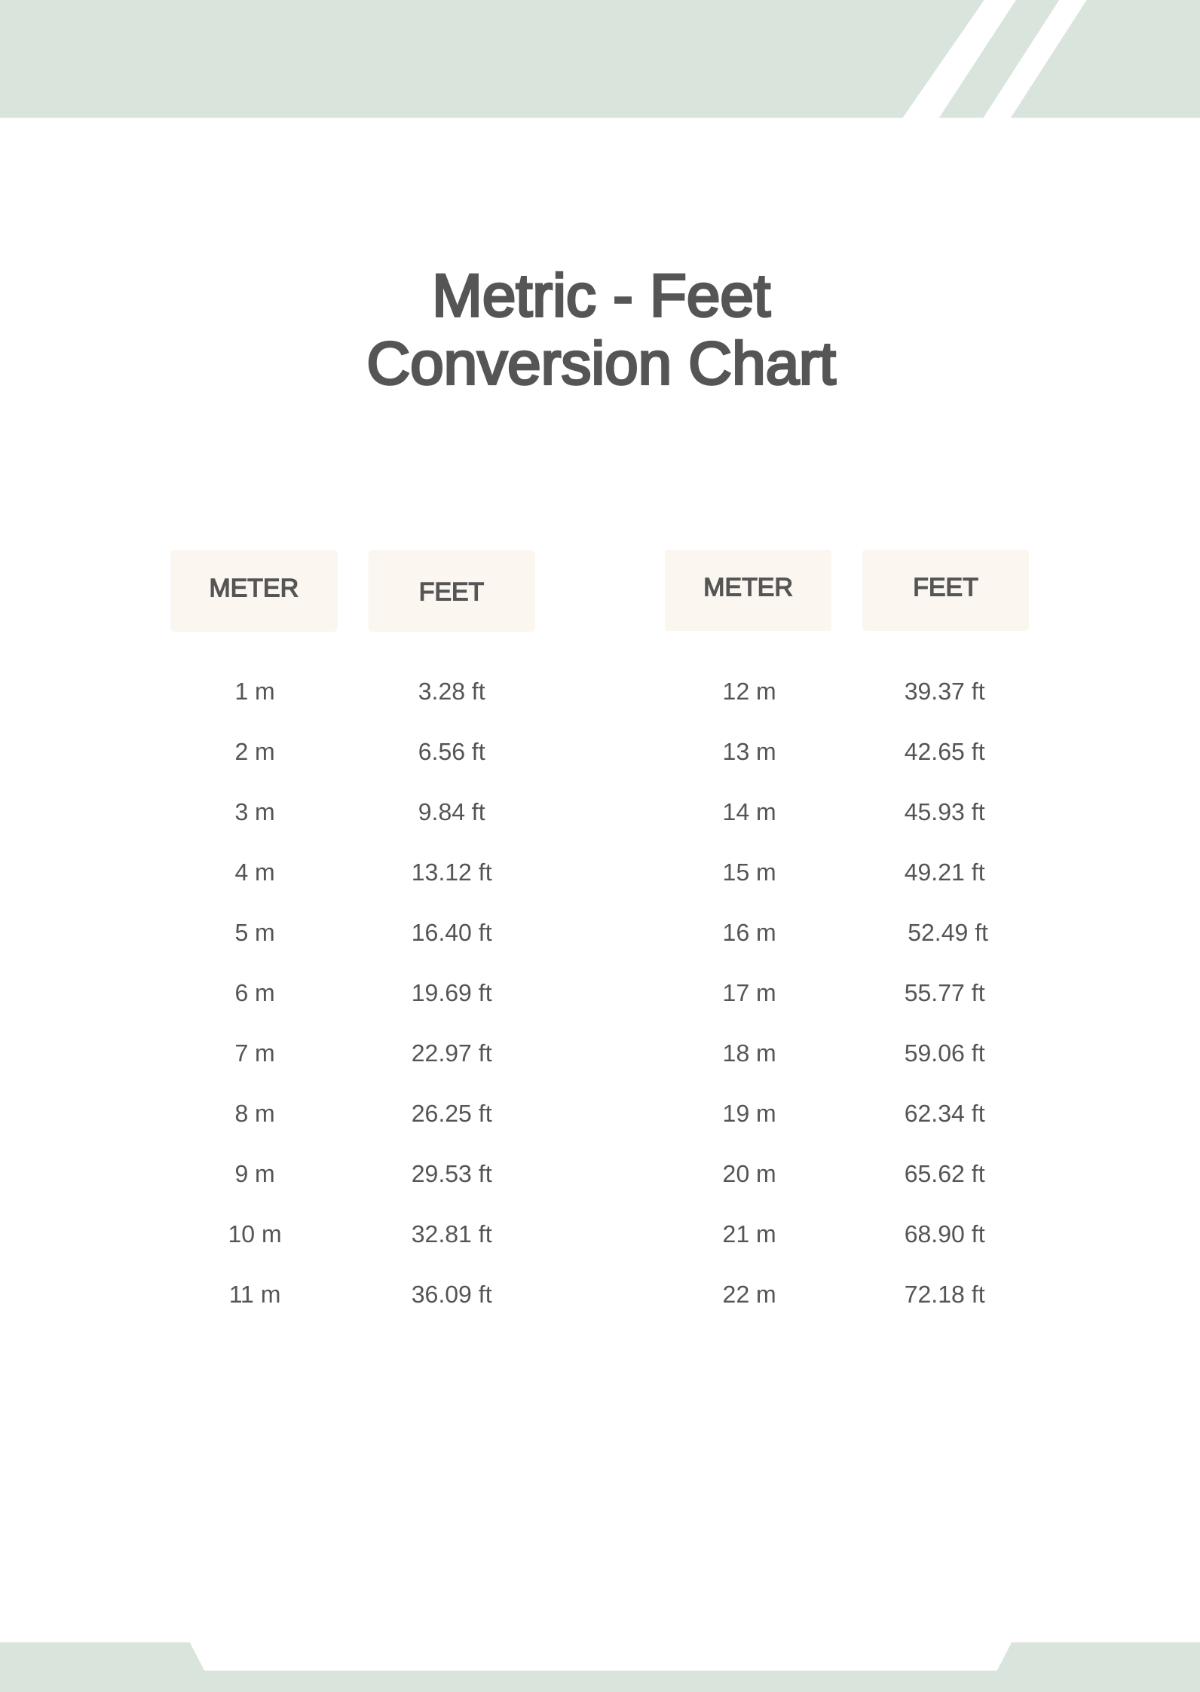 Metric to Feet Conversion Chart Template